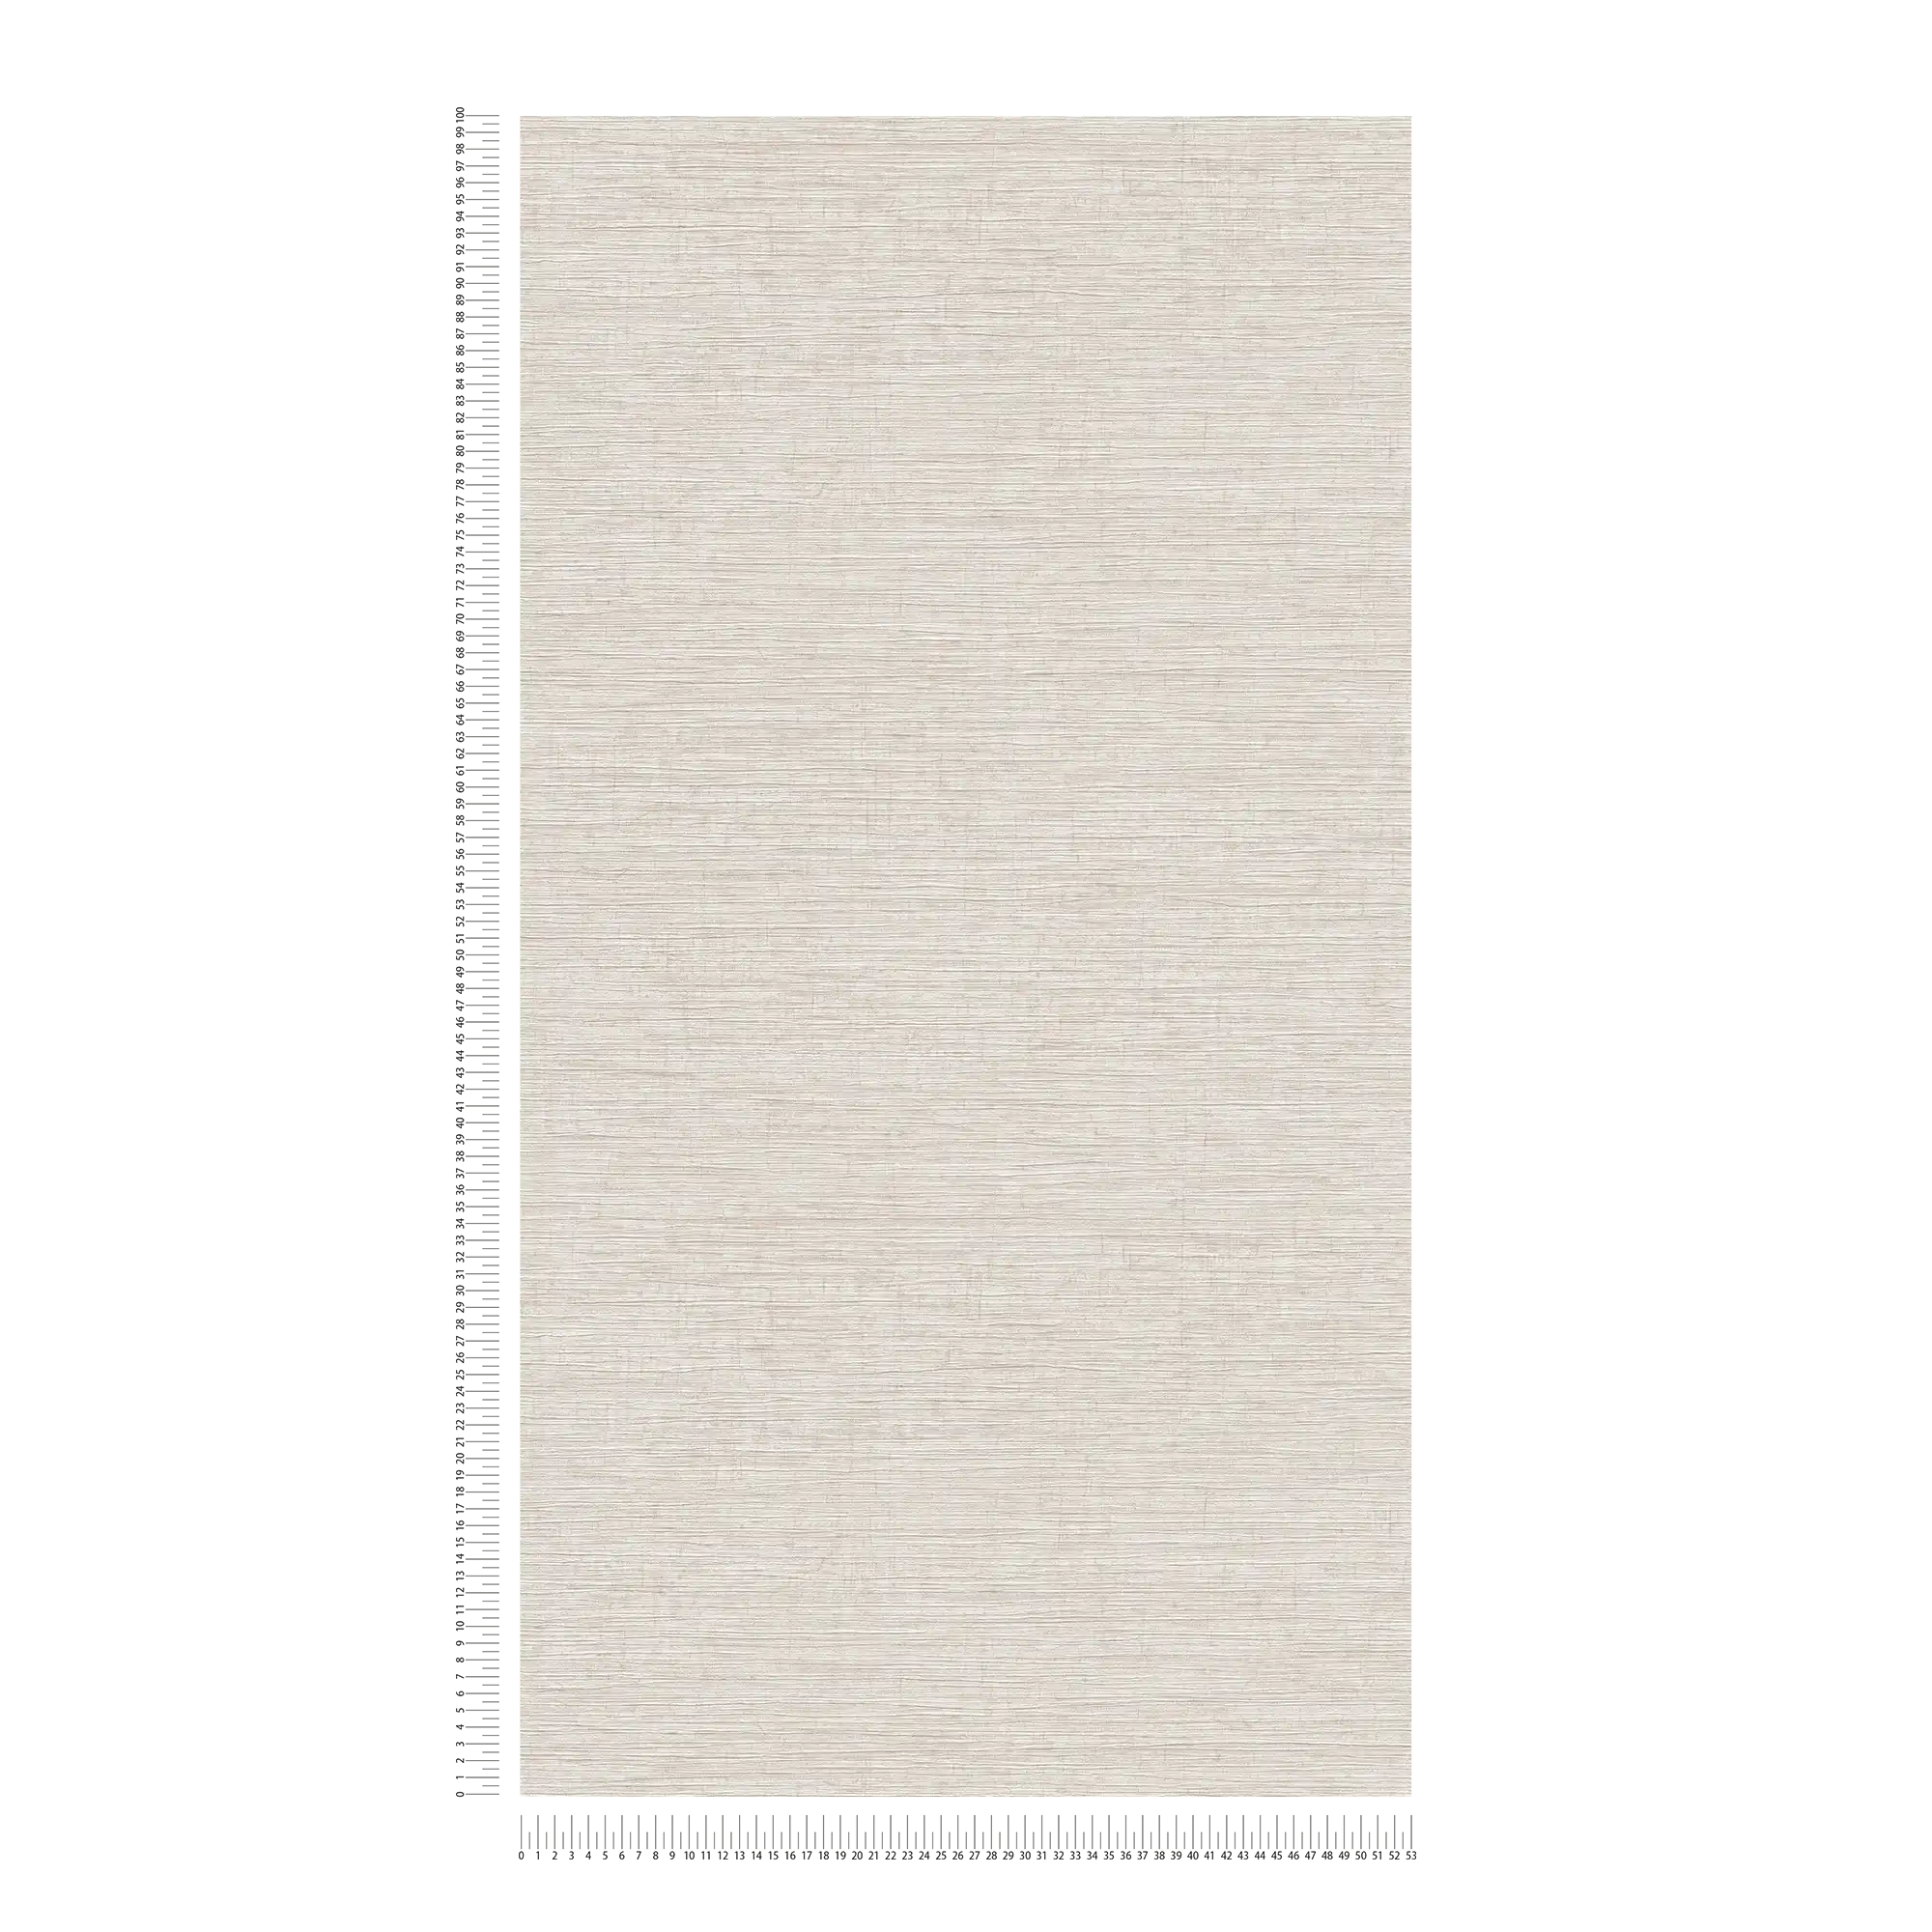             Non-woven wallpaper mottled with textile embossed pattern - beige, brown, grey
        